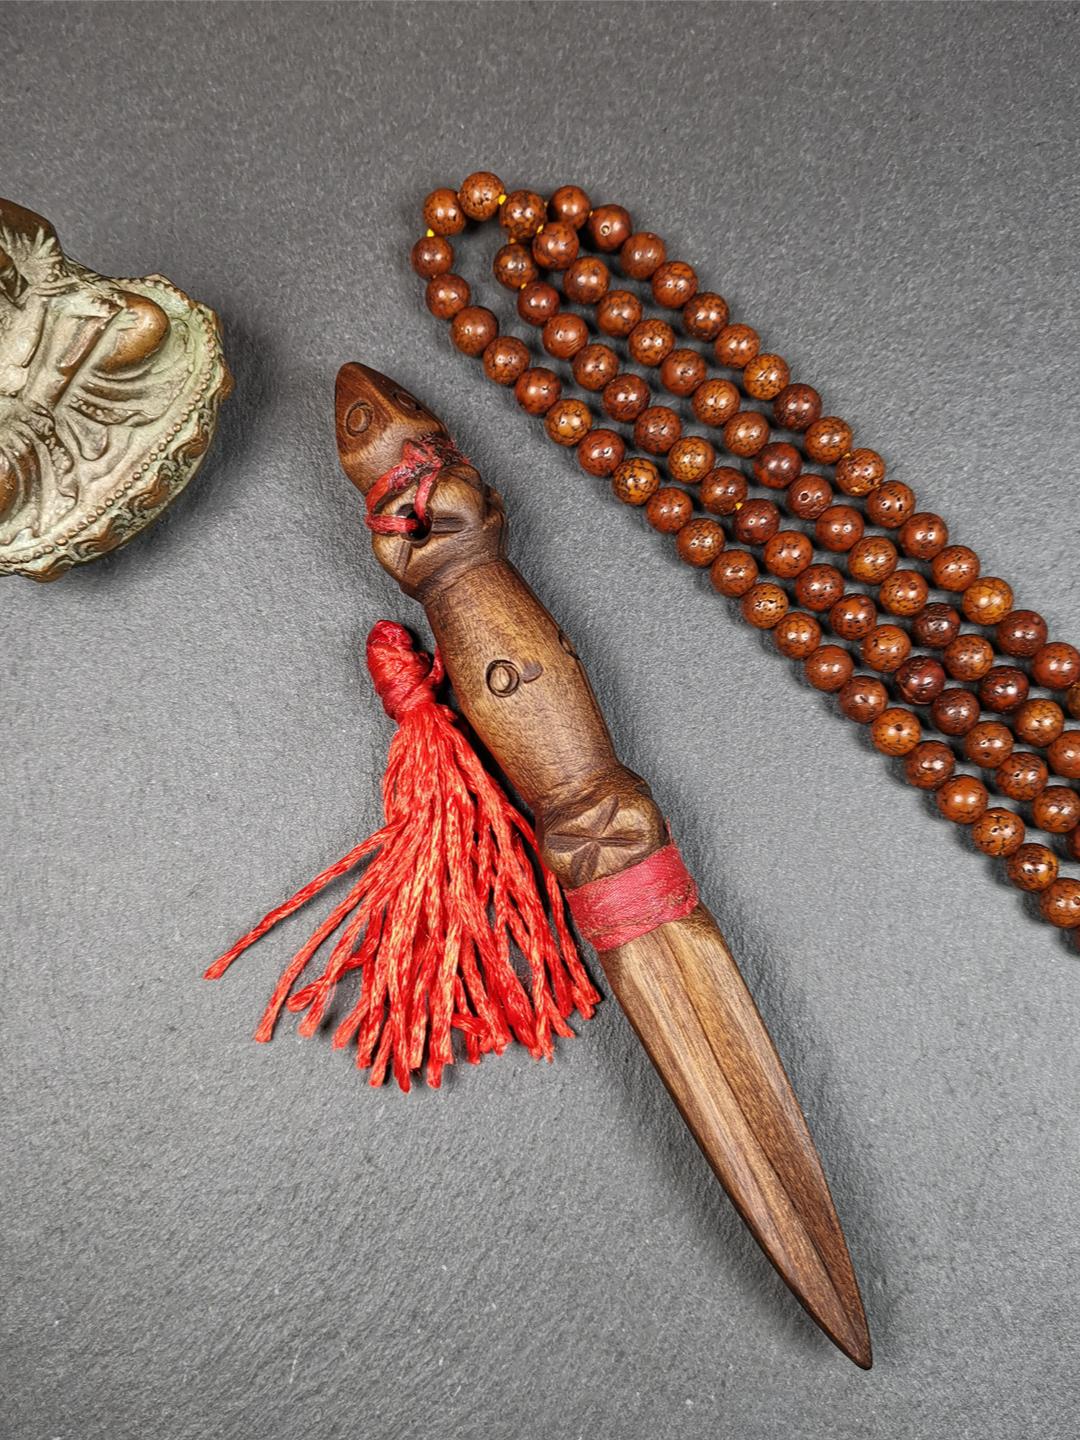 This handmade Dorje Phurba was collected from Derge, Tibet,used in Mahakala buddhist pujas in Gengqing monastery, made of sandalwood, very delicate. You can put it in your Buddhist hall or altar as a ritual decoration